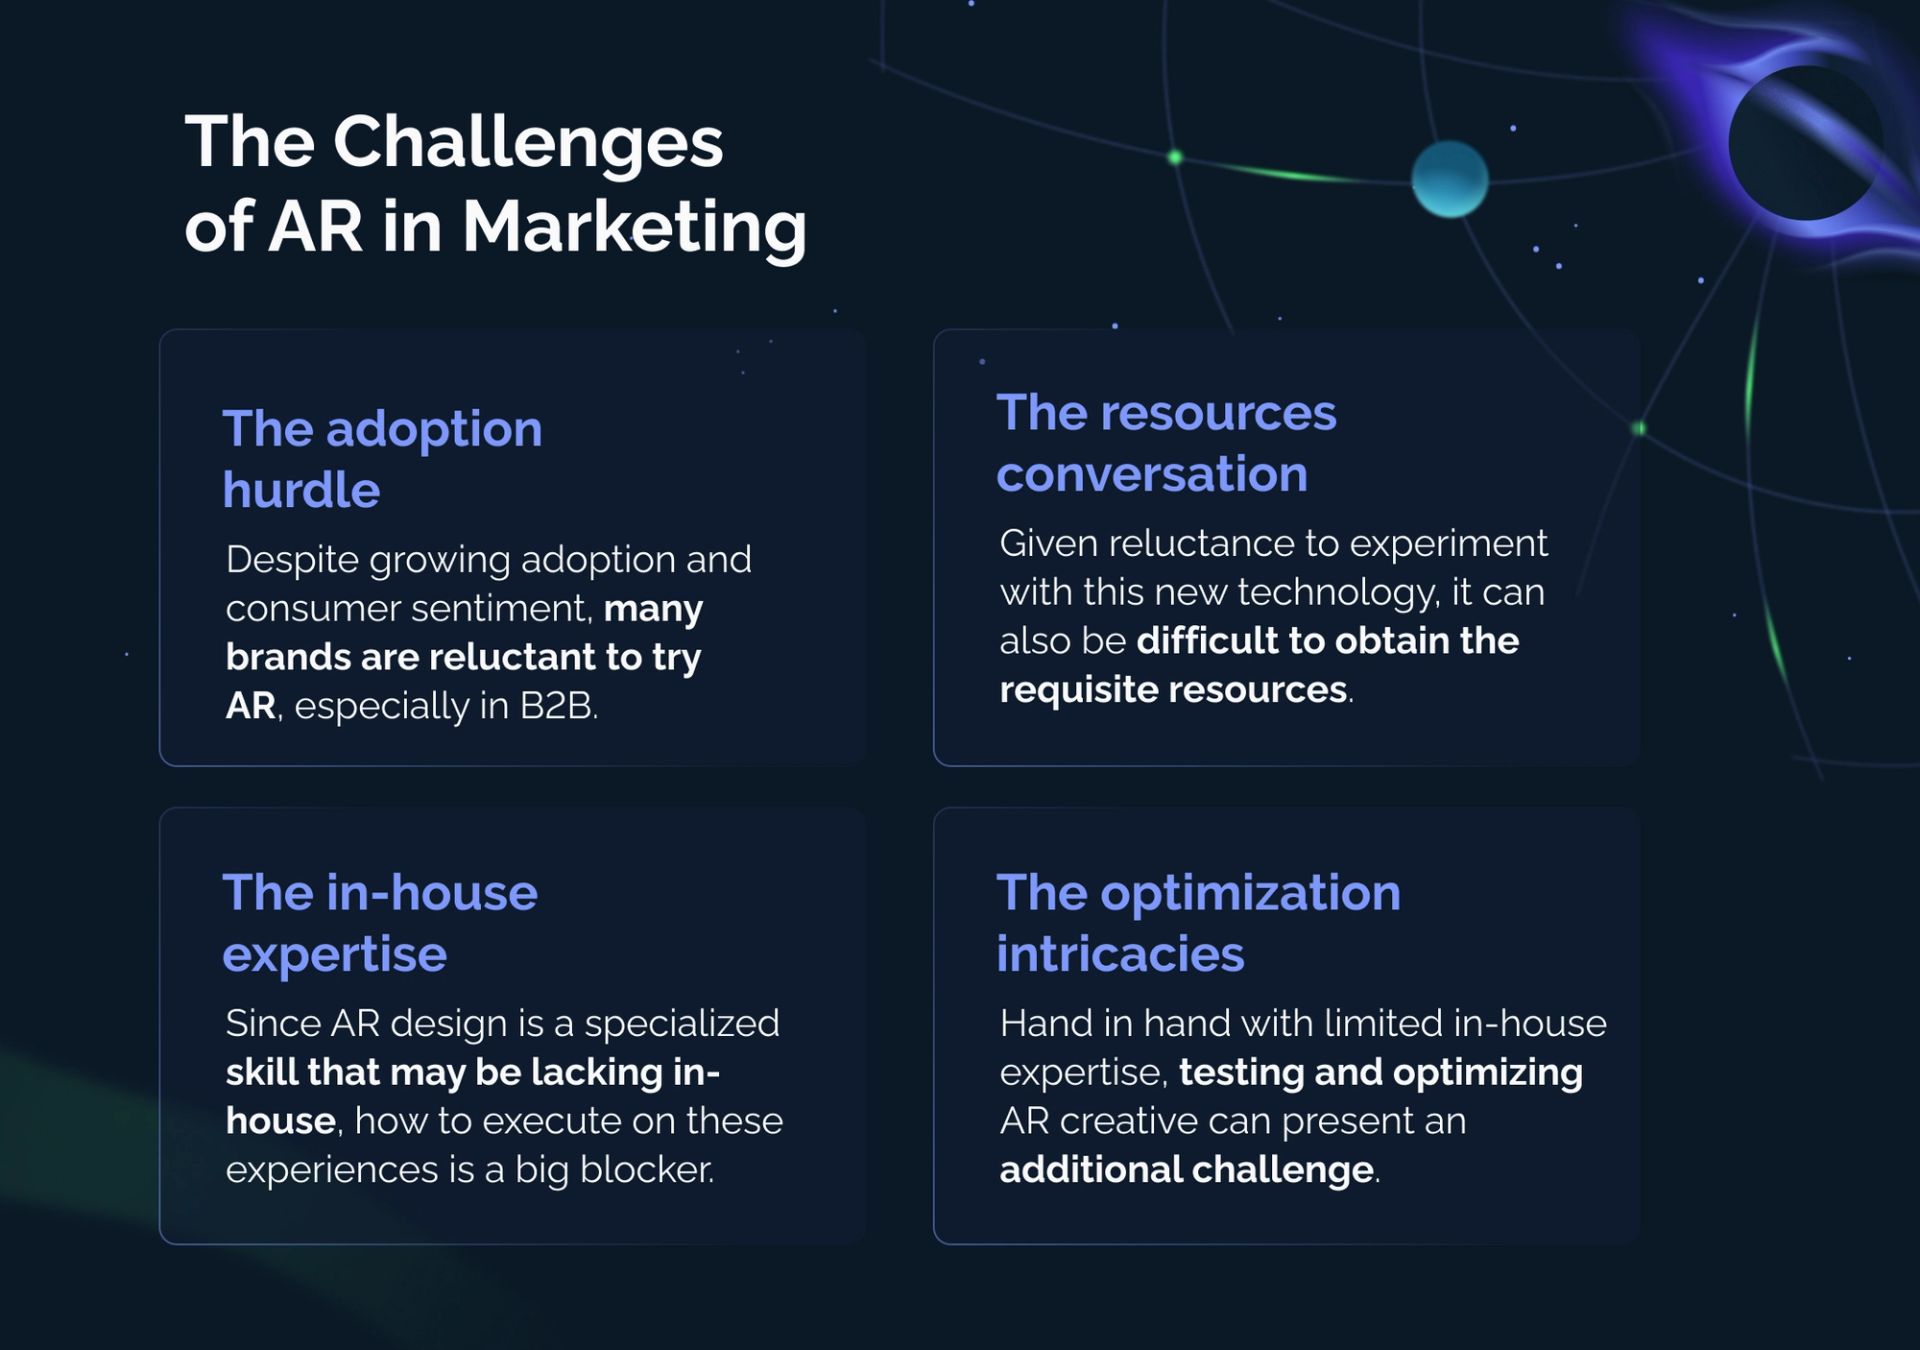 The challenges of AR in marketing